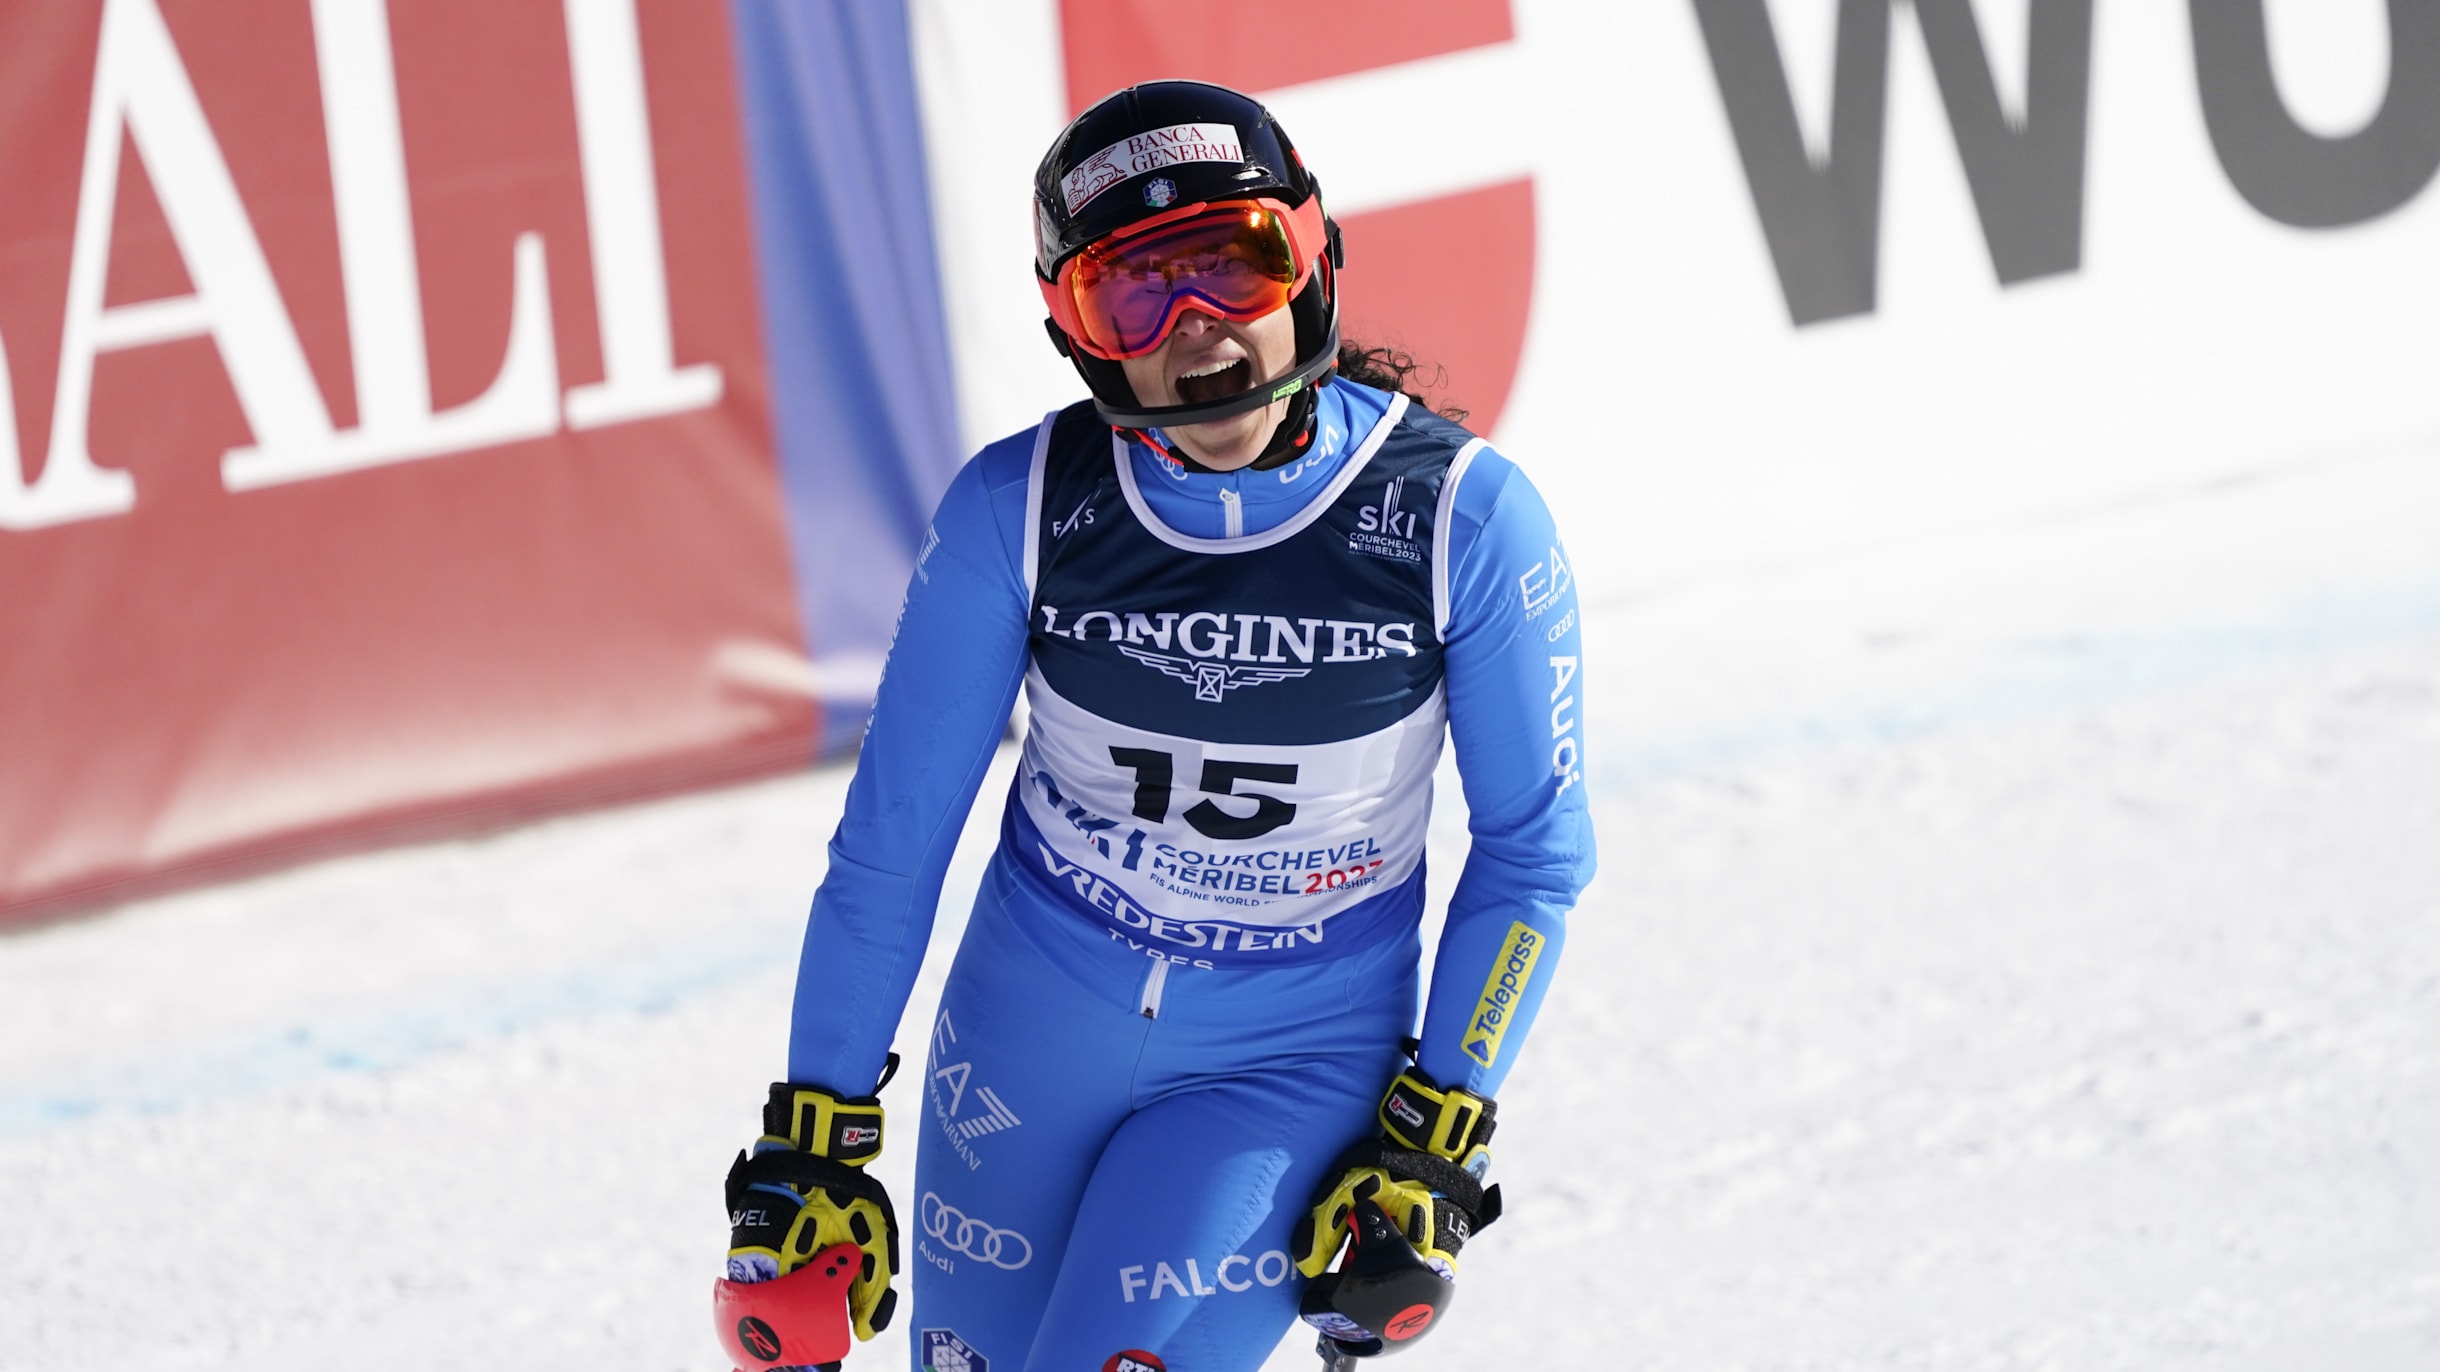 Federica Brignone wins womens combined world title at 2023 Alpine World Ski Championships as Mikaela Shiffrin disqualified after straddling gate